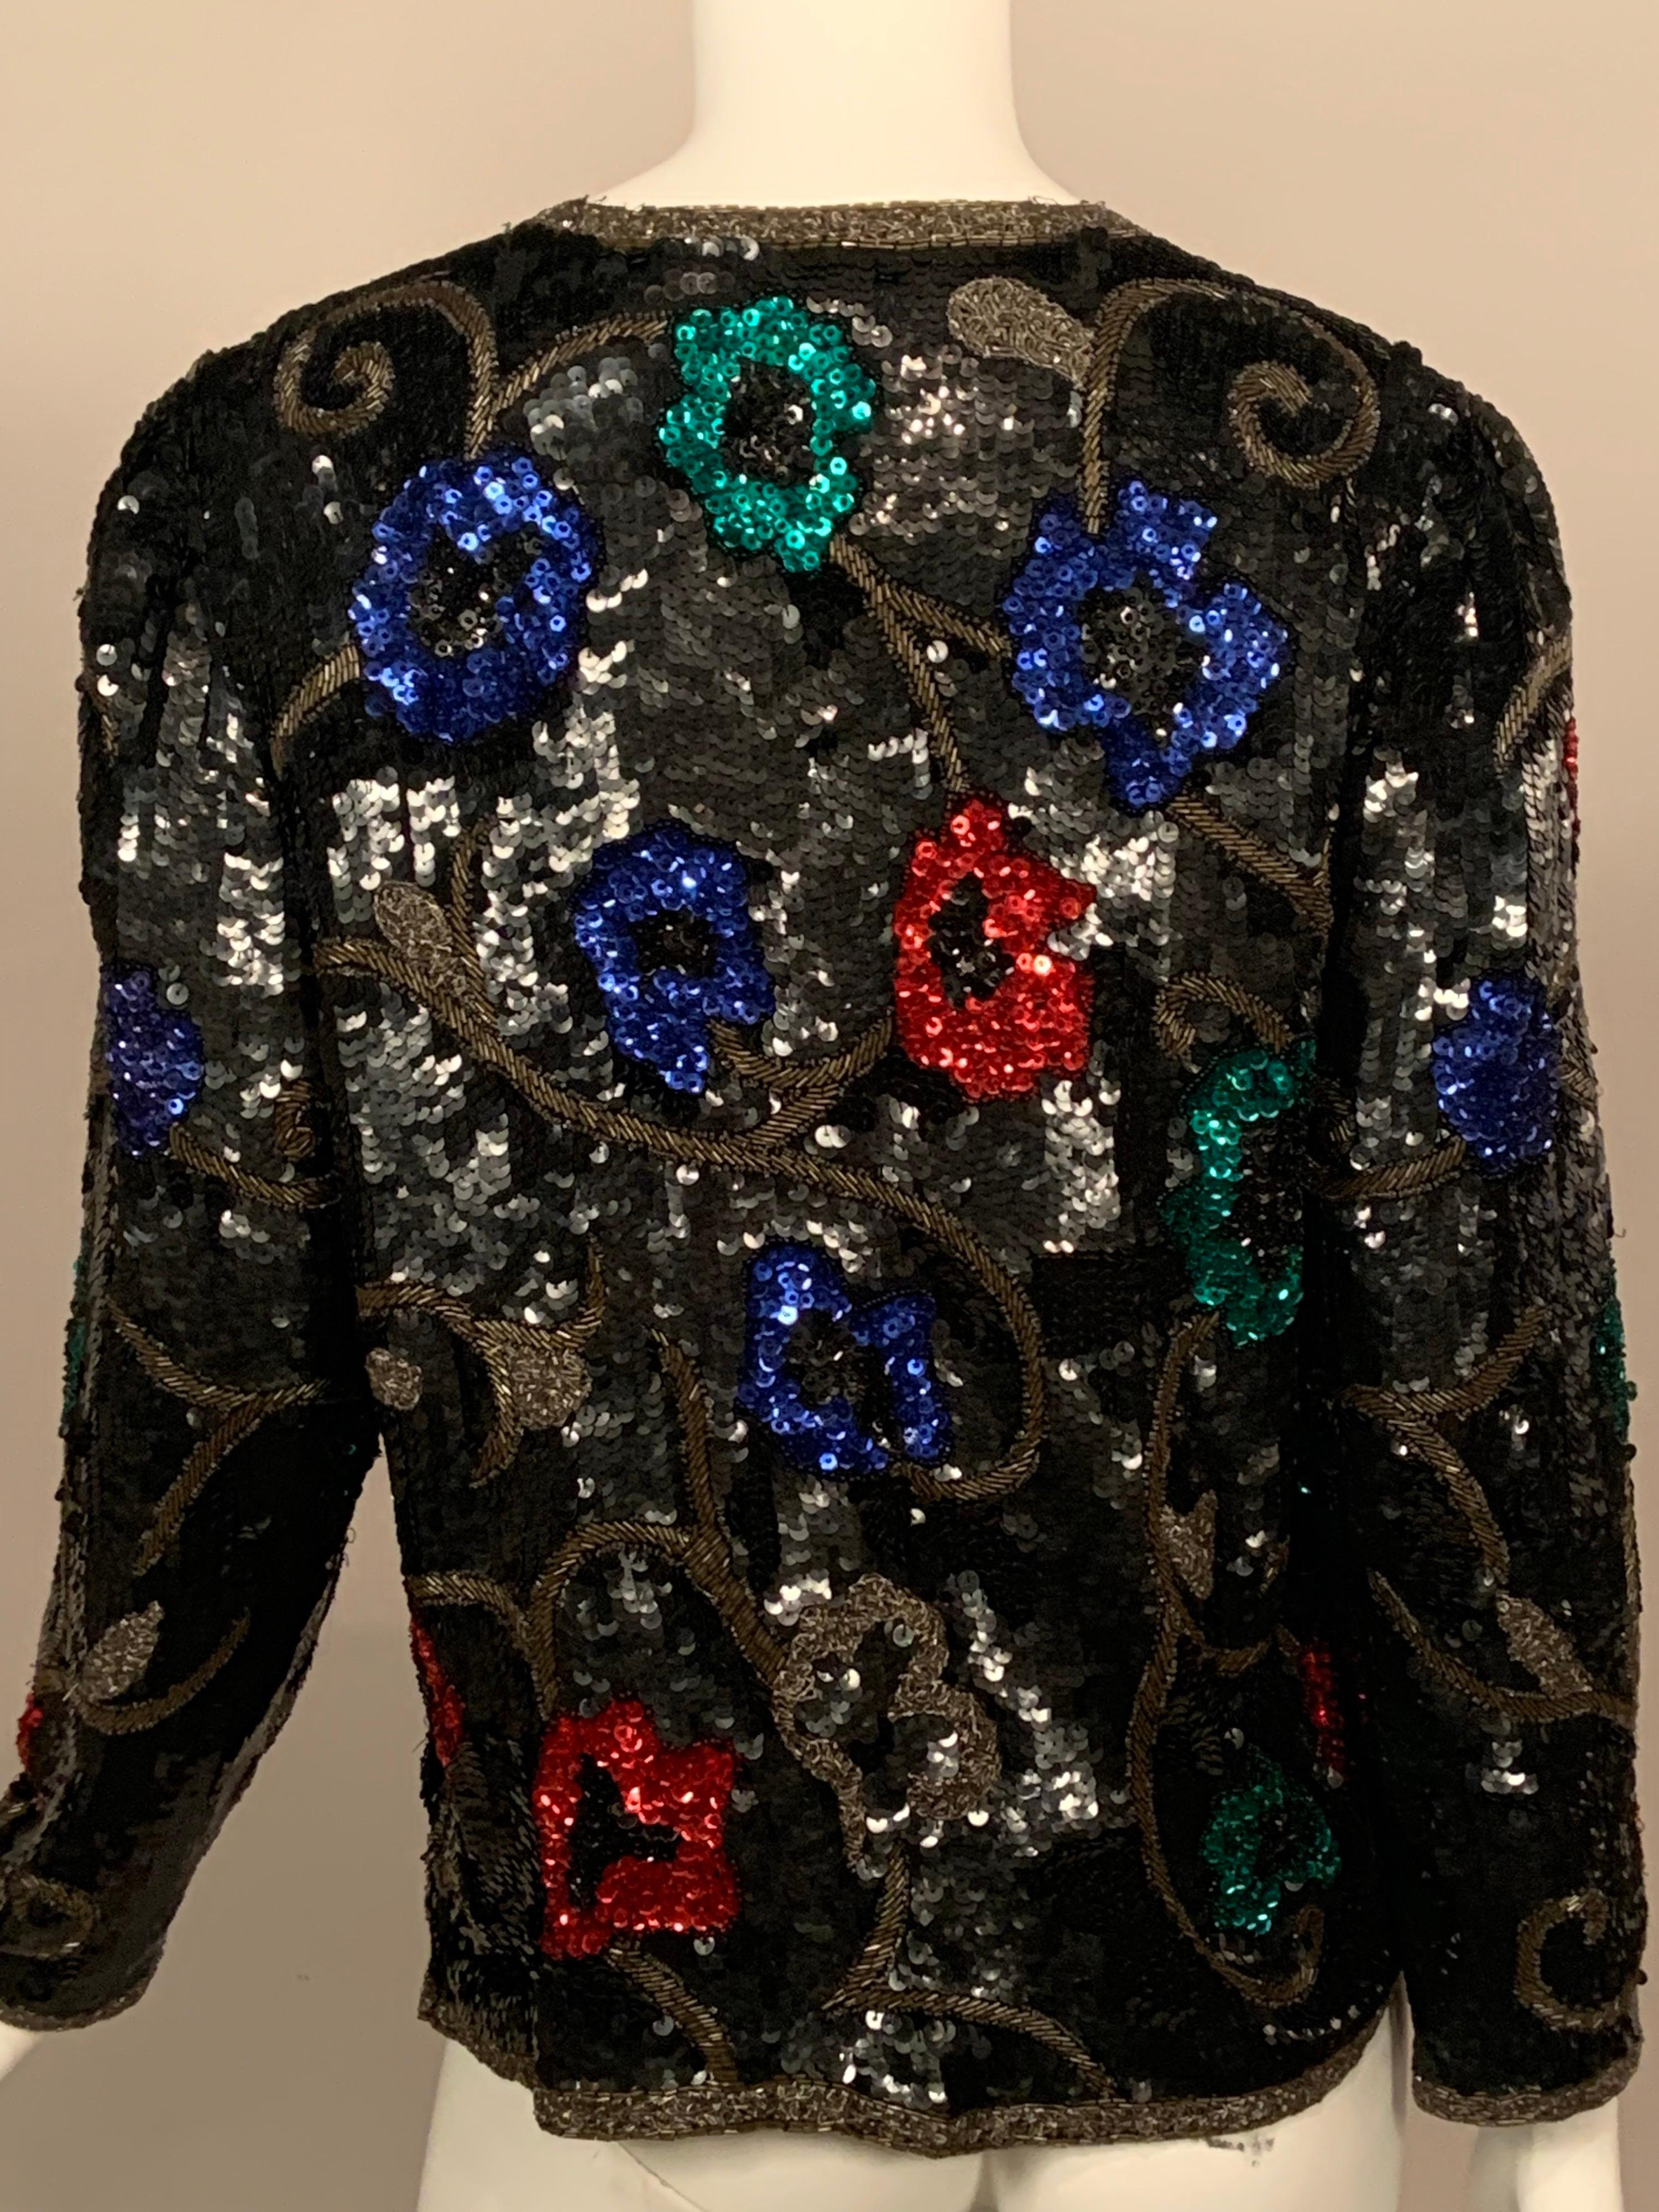 Black Sequin Jacket with Colorful Flower and Vine Decoration For Sale 2